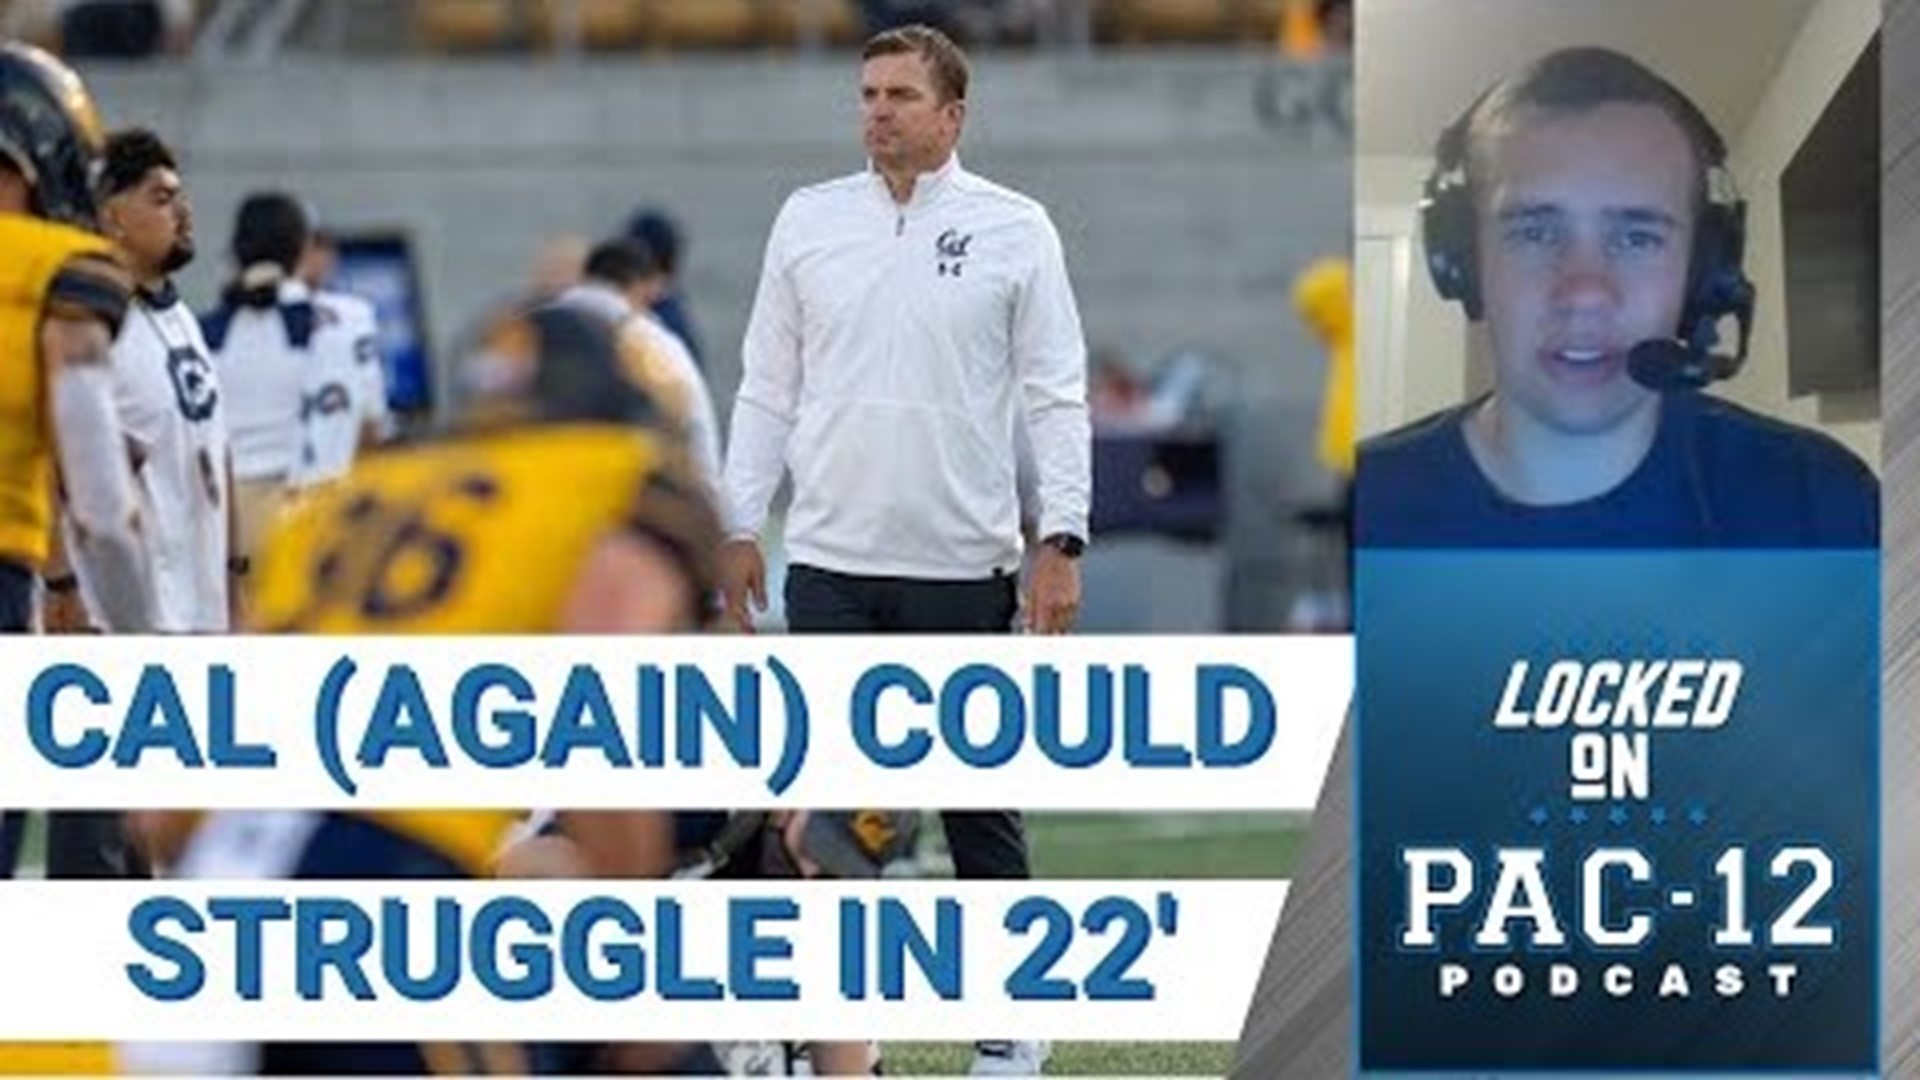 Cal Bears fans are hoping the end of last season translates into wins in 2022, but their hopes may very well not come to fruition.